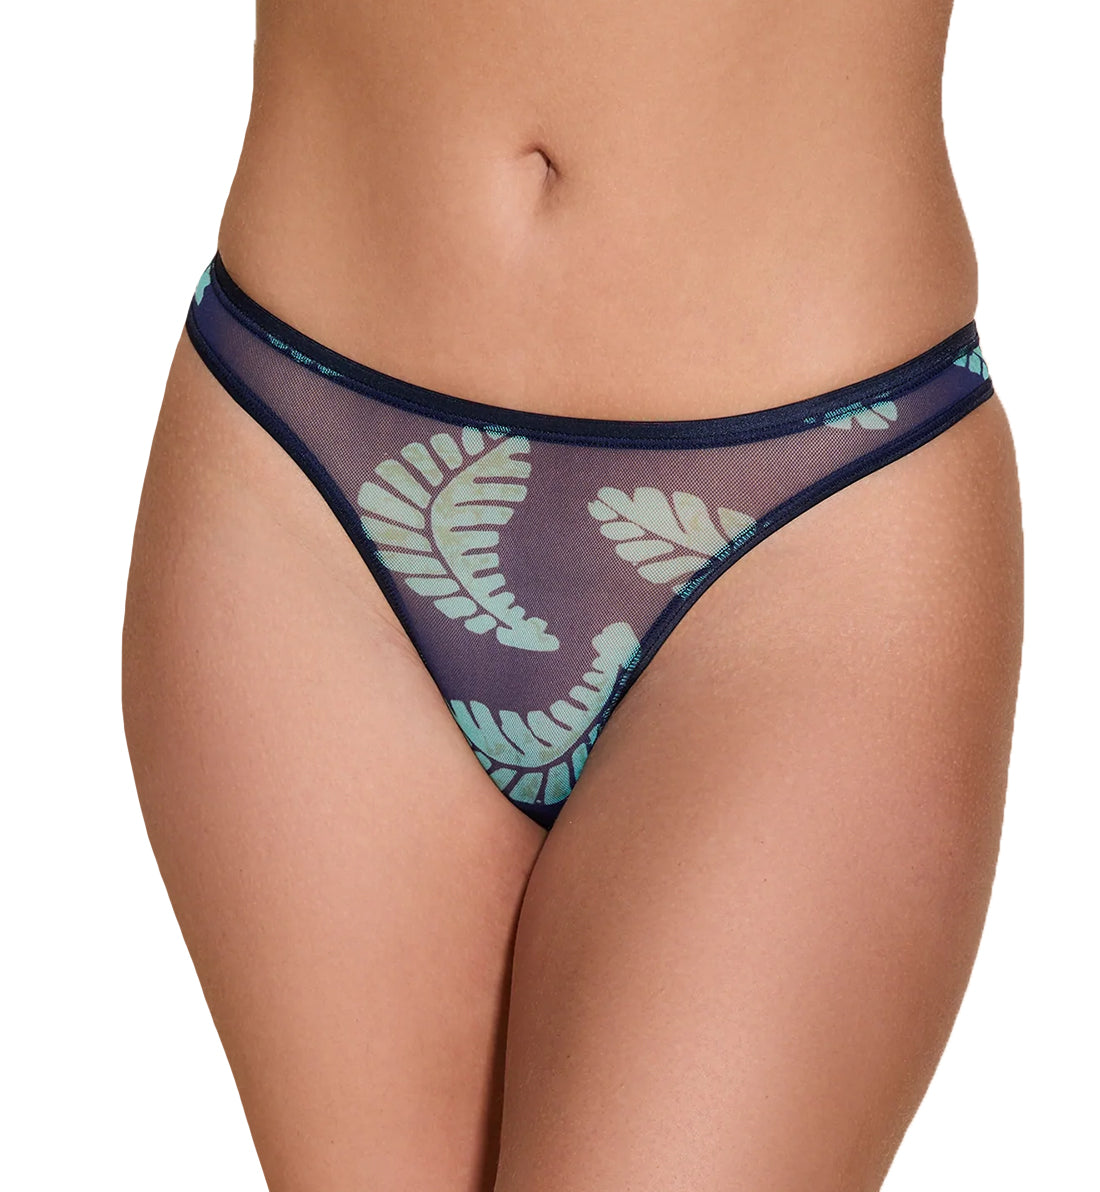 Cosabella Soire Confidence Print Classic Thong (SOICP0322),S/M,Leaf - Leaf,S/M